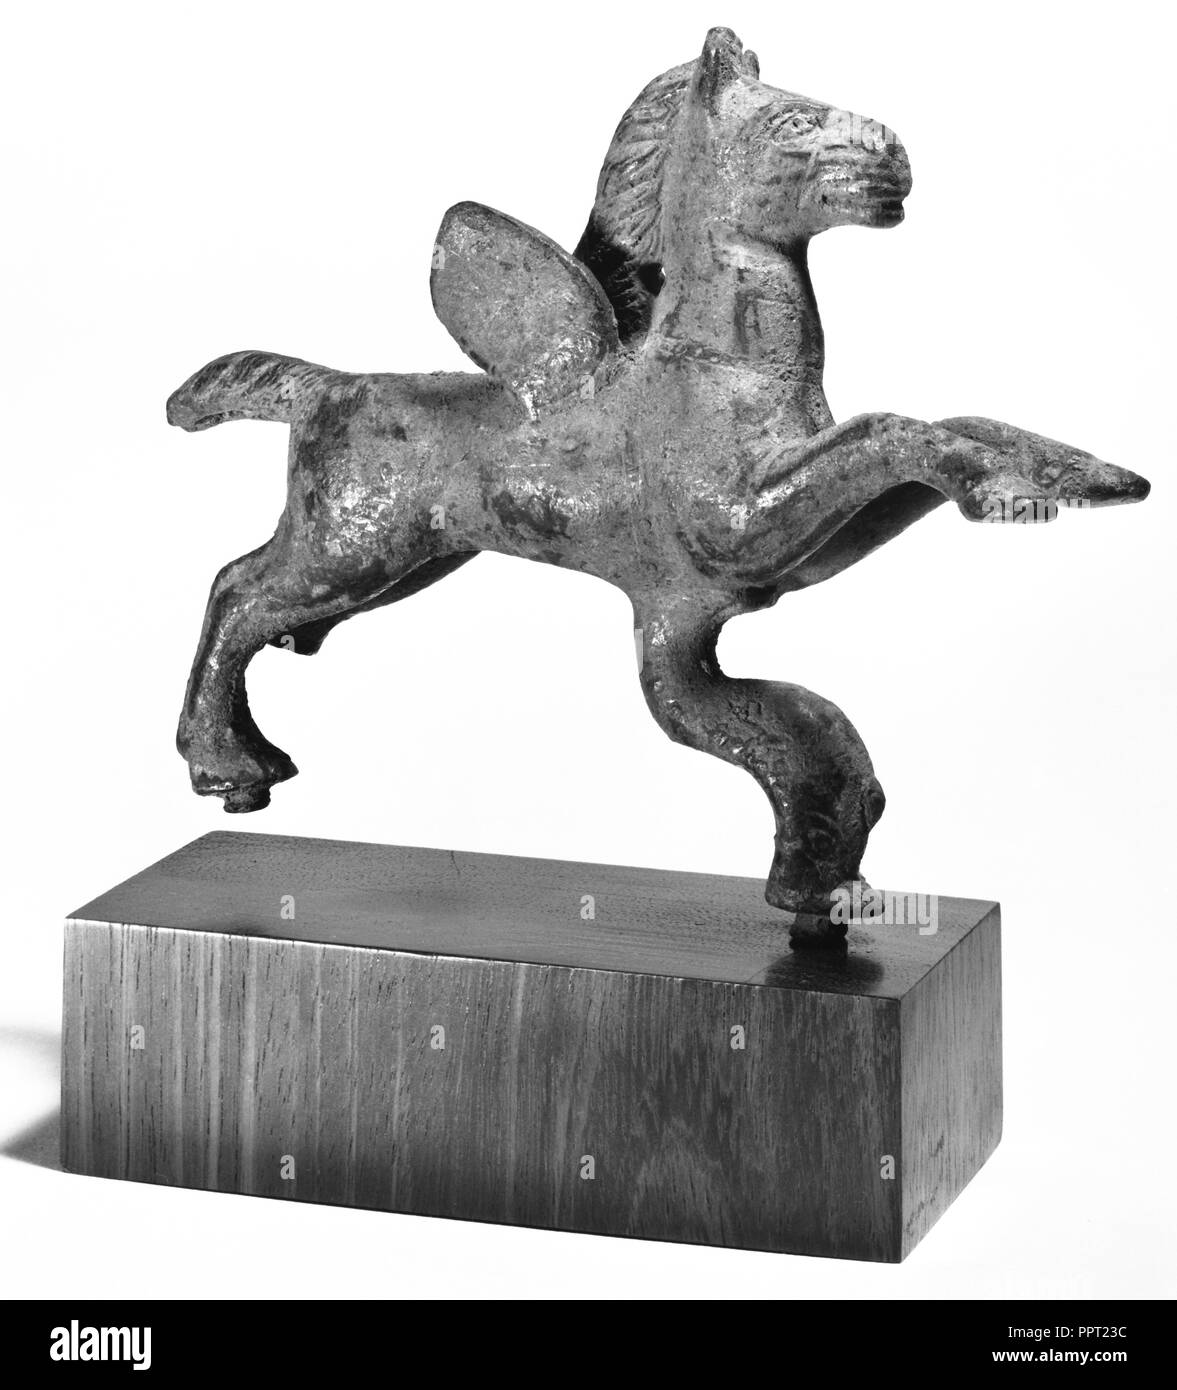 Furniture Support of Pegasus with Dolphin; Roman Empire; 2nd - 3rd century; Bronze; 10 × 12.3 cm, 3 15,16 × 4 13,16 in Stock Photo